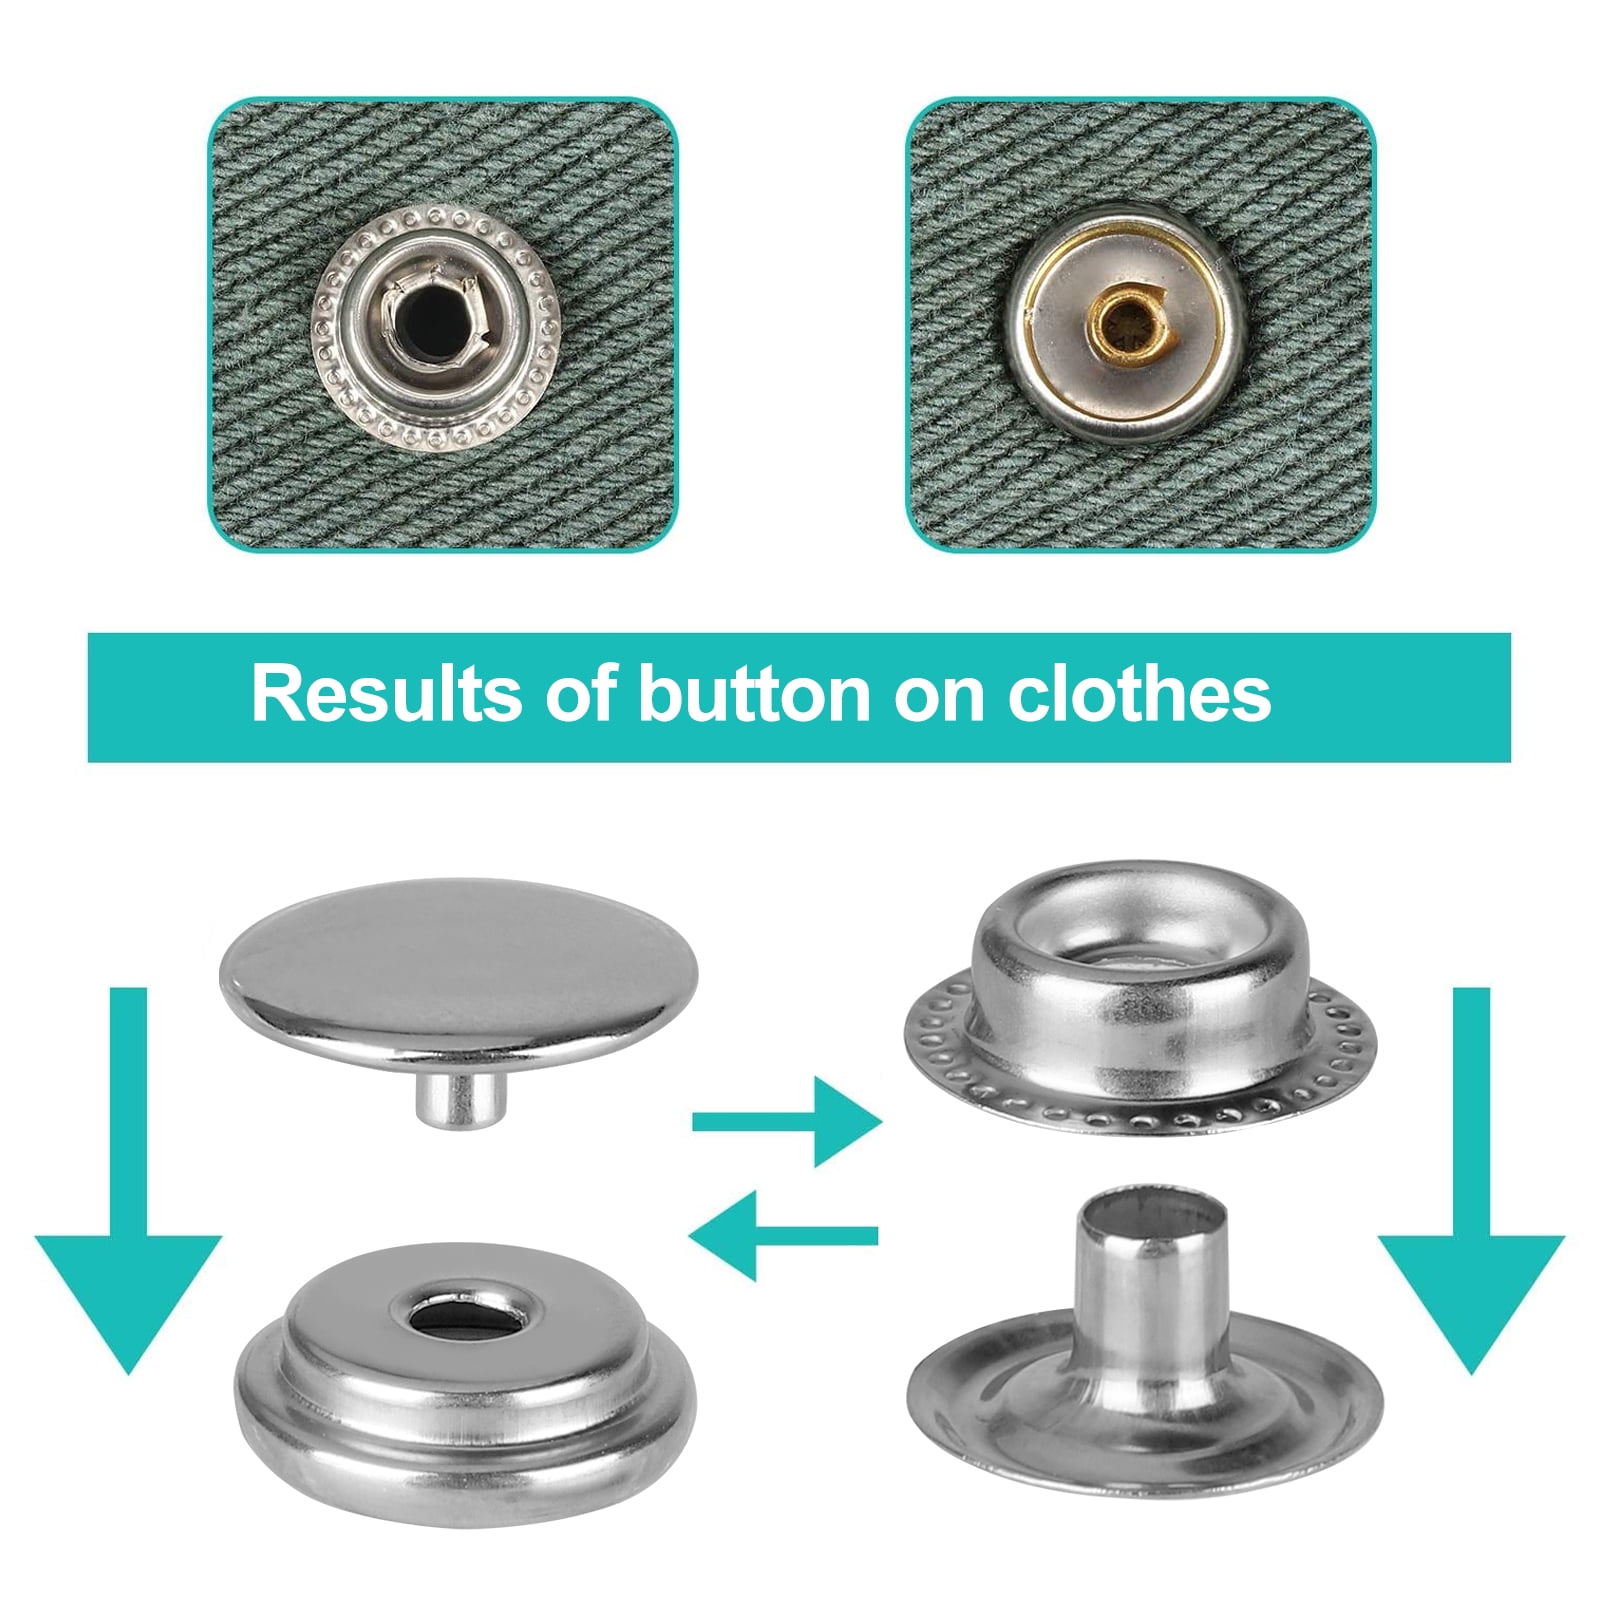 500 Pieces Stainless Steel Snap Fastener, BetterJonny 15mm Heavy Duty Snap Button Press Stud Cap for Jeans Fabric Jackets Clothes Bag Leather DIY